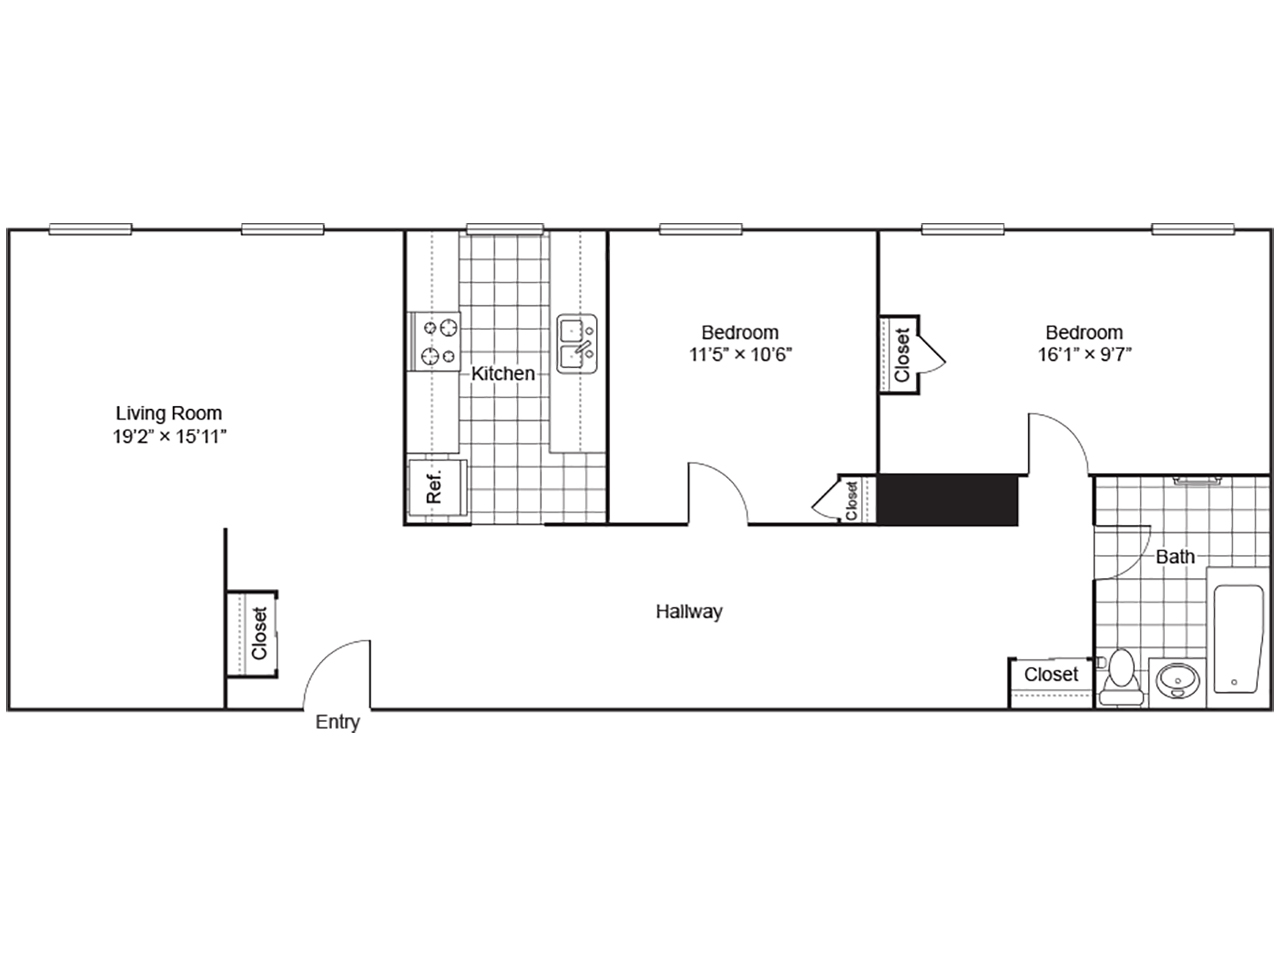 Two bedroom apartment with bath, kitchen, and living room